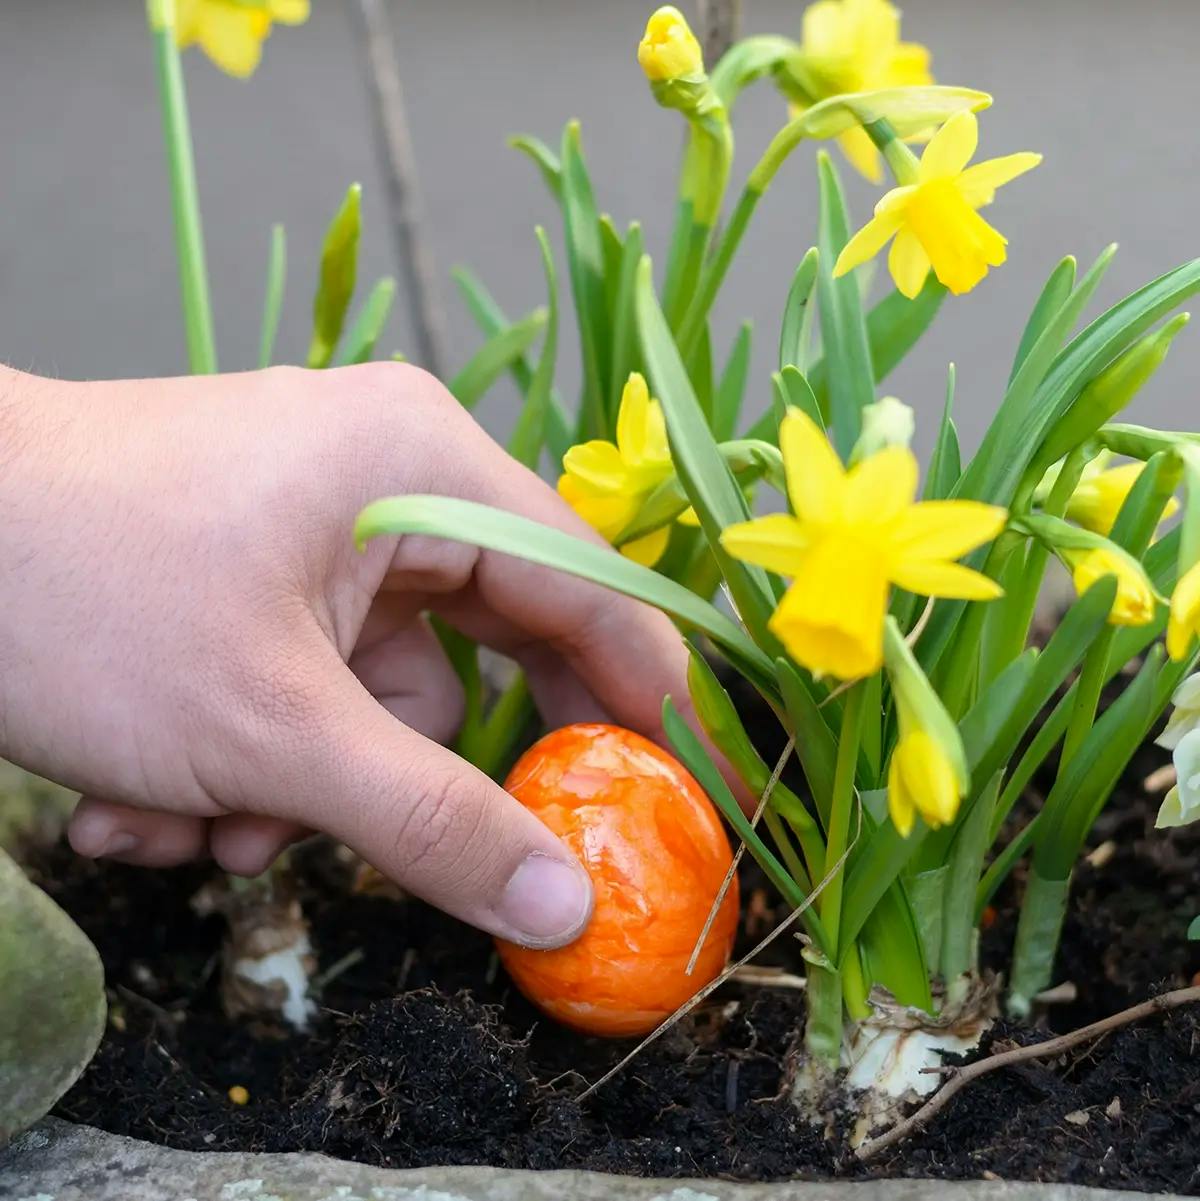 A hand hiding an Easter egg in a planter of Daffodils.